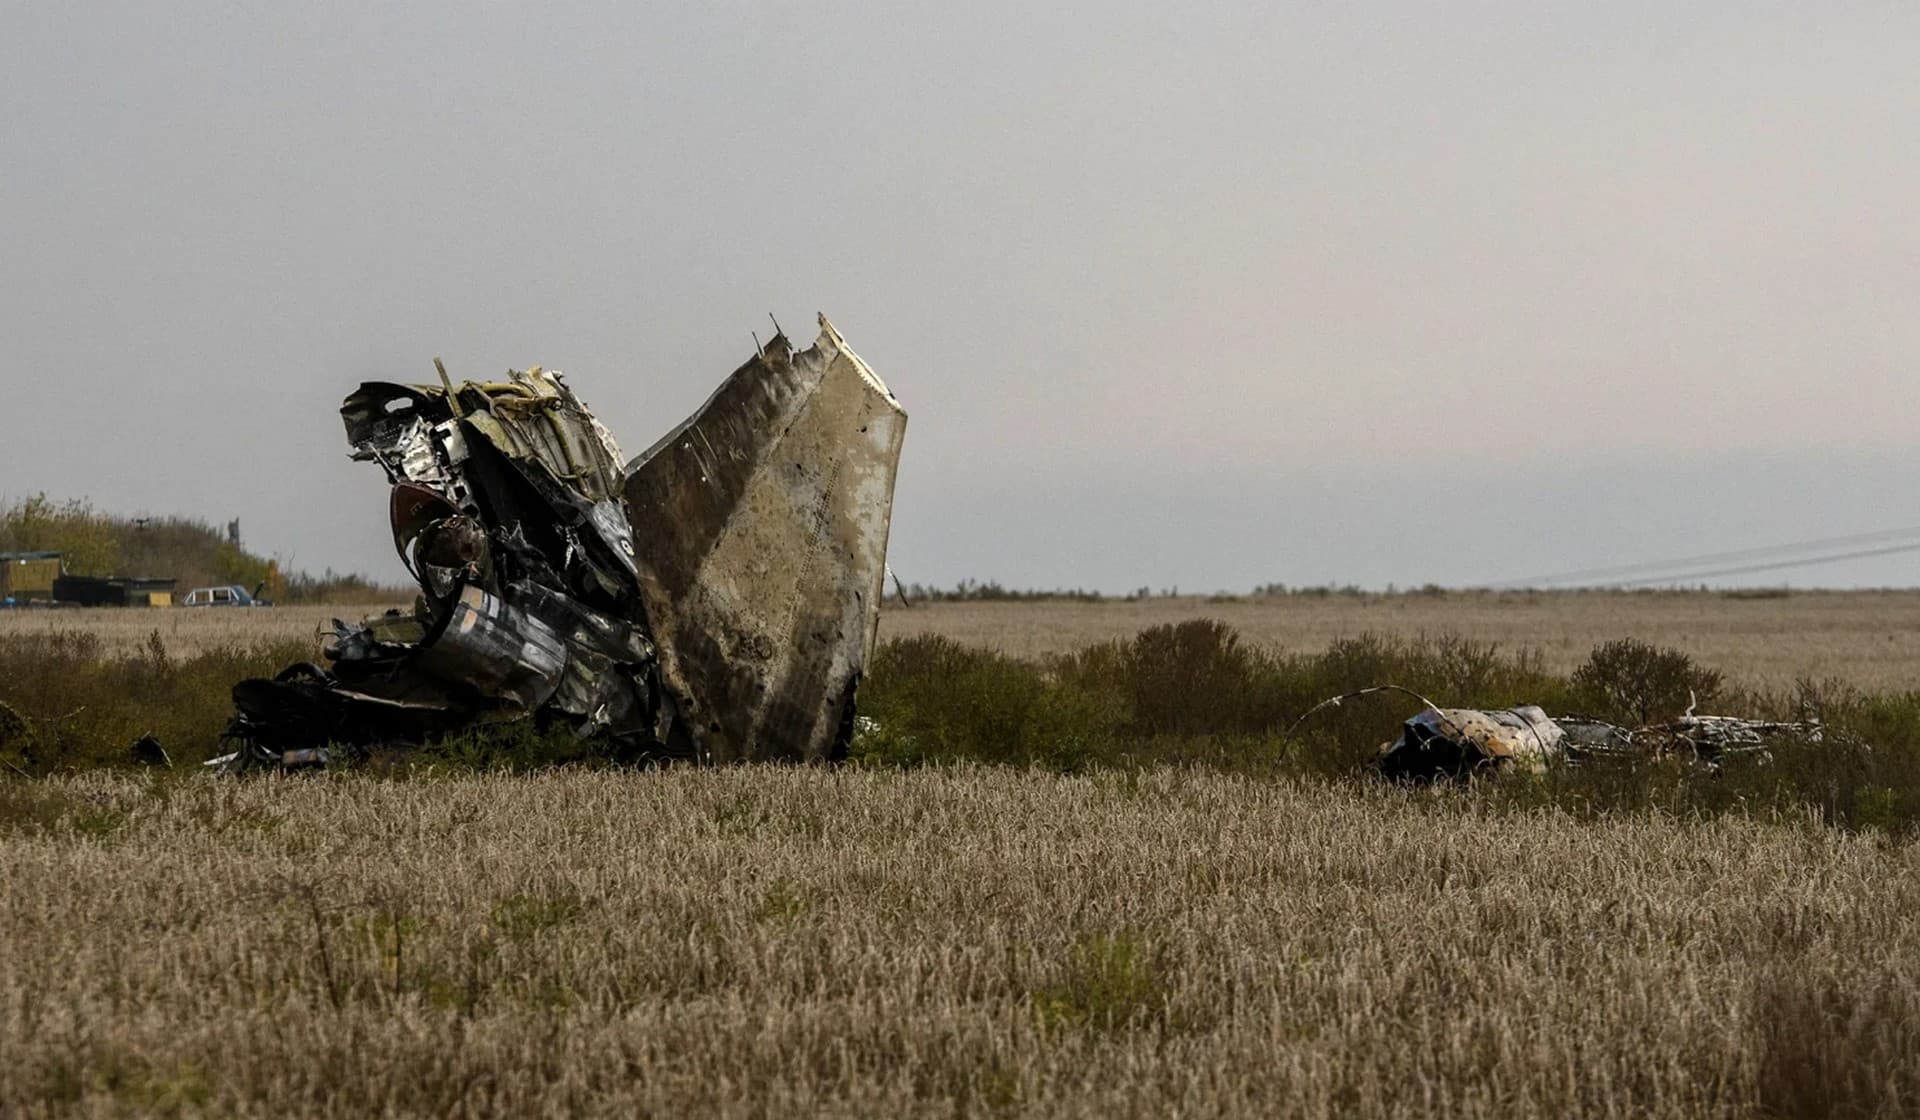 The wreckage of a Russian fighting aircraft shot down by the Ukrainian Armed Forces during a counteroffensive operation in a field near the town of Izium